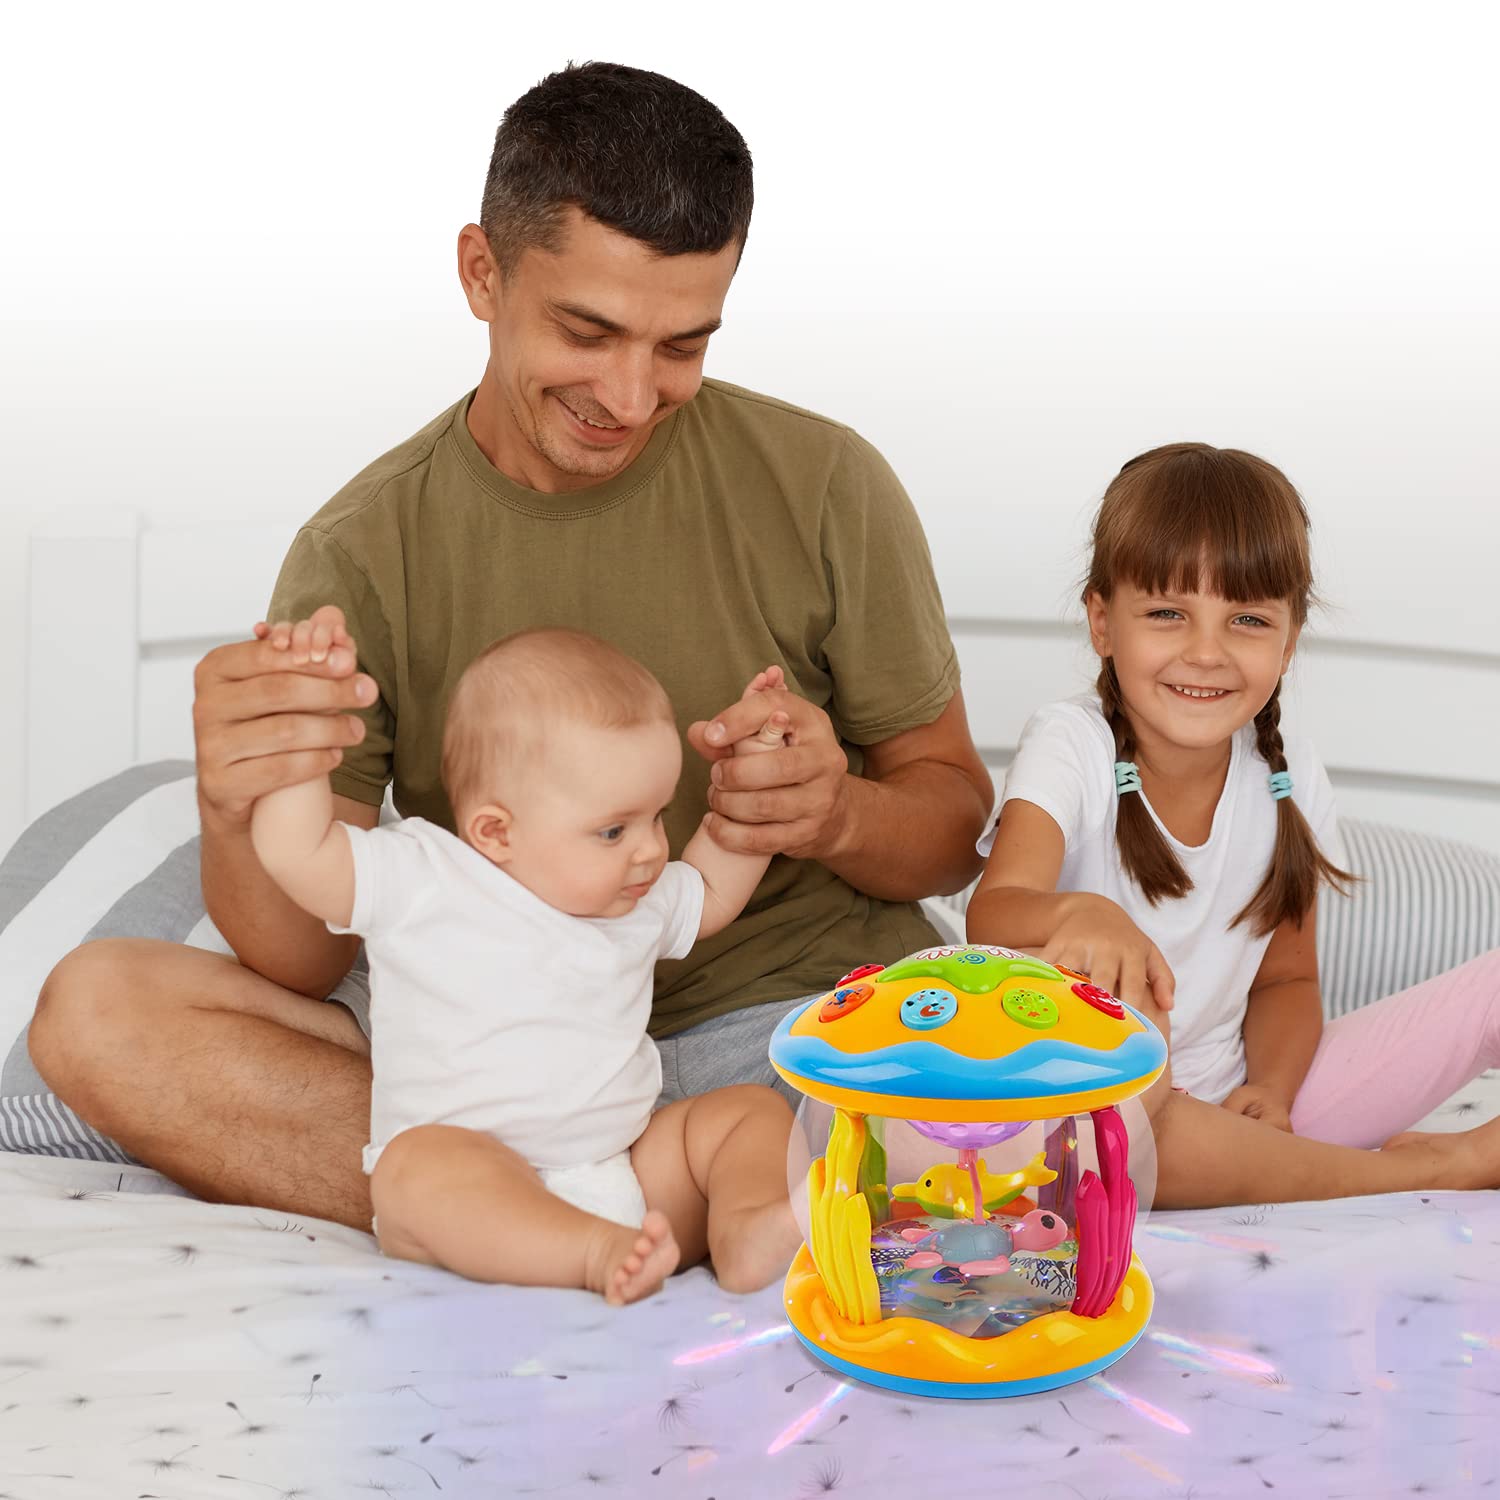 Baby Toys 6 to 12 Months Ocean Projector Baby Light Up Toys Musical Tummy Time Infant Toys 3-6 6-12 12-18 Months 6 7 8 9 Month Old Baby Crawling Toys One Year Old Birthday Gifts Boys Girls